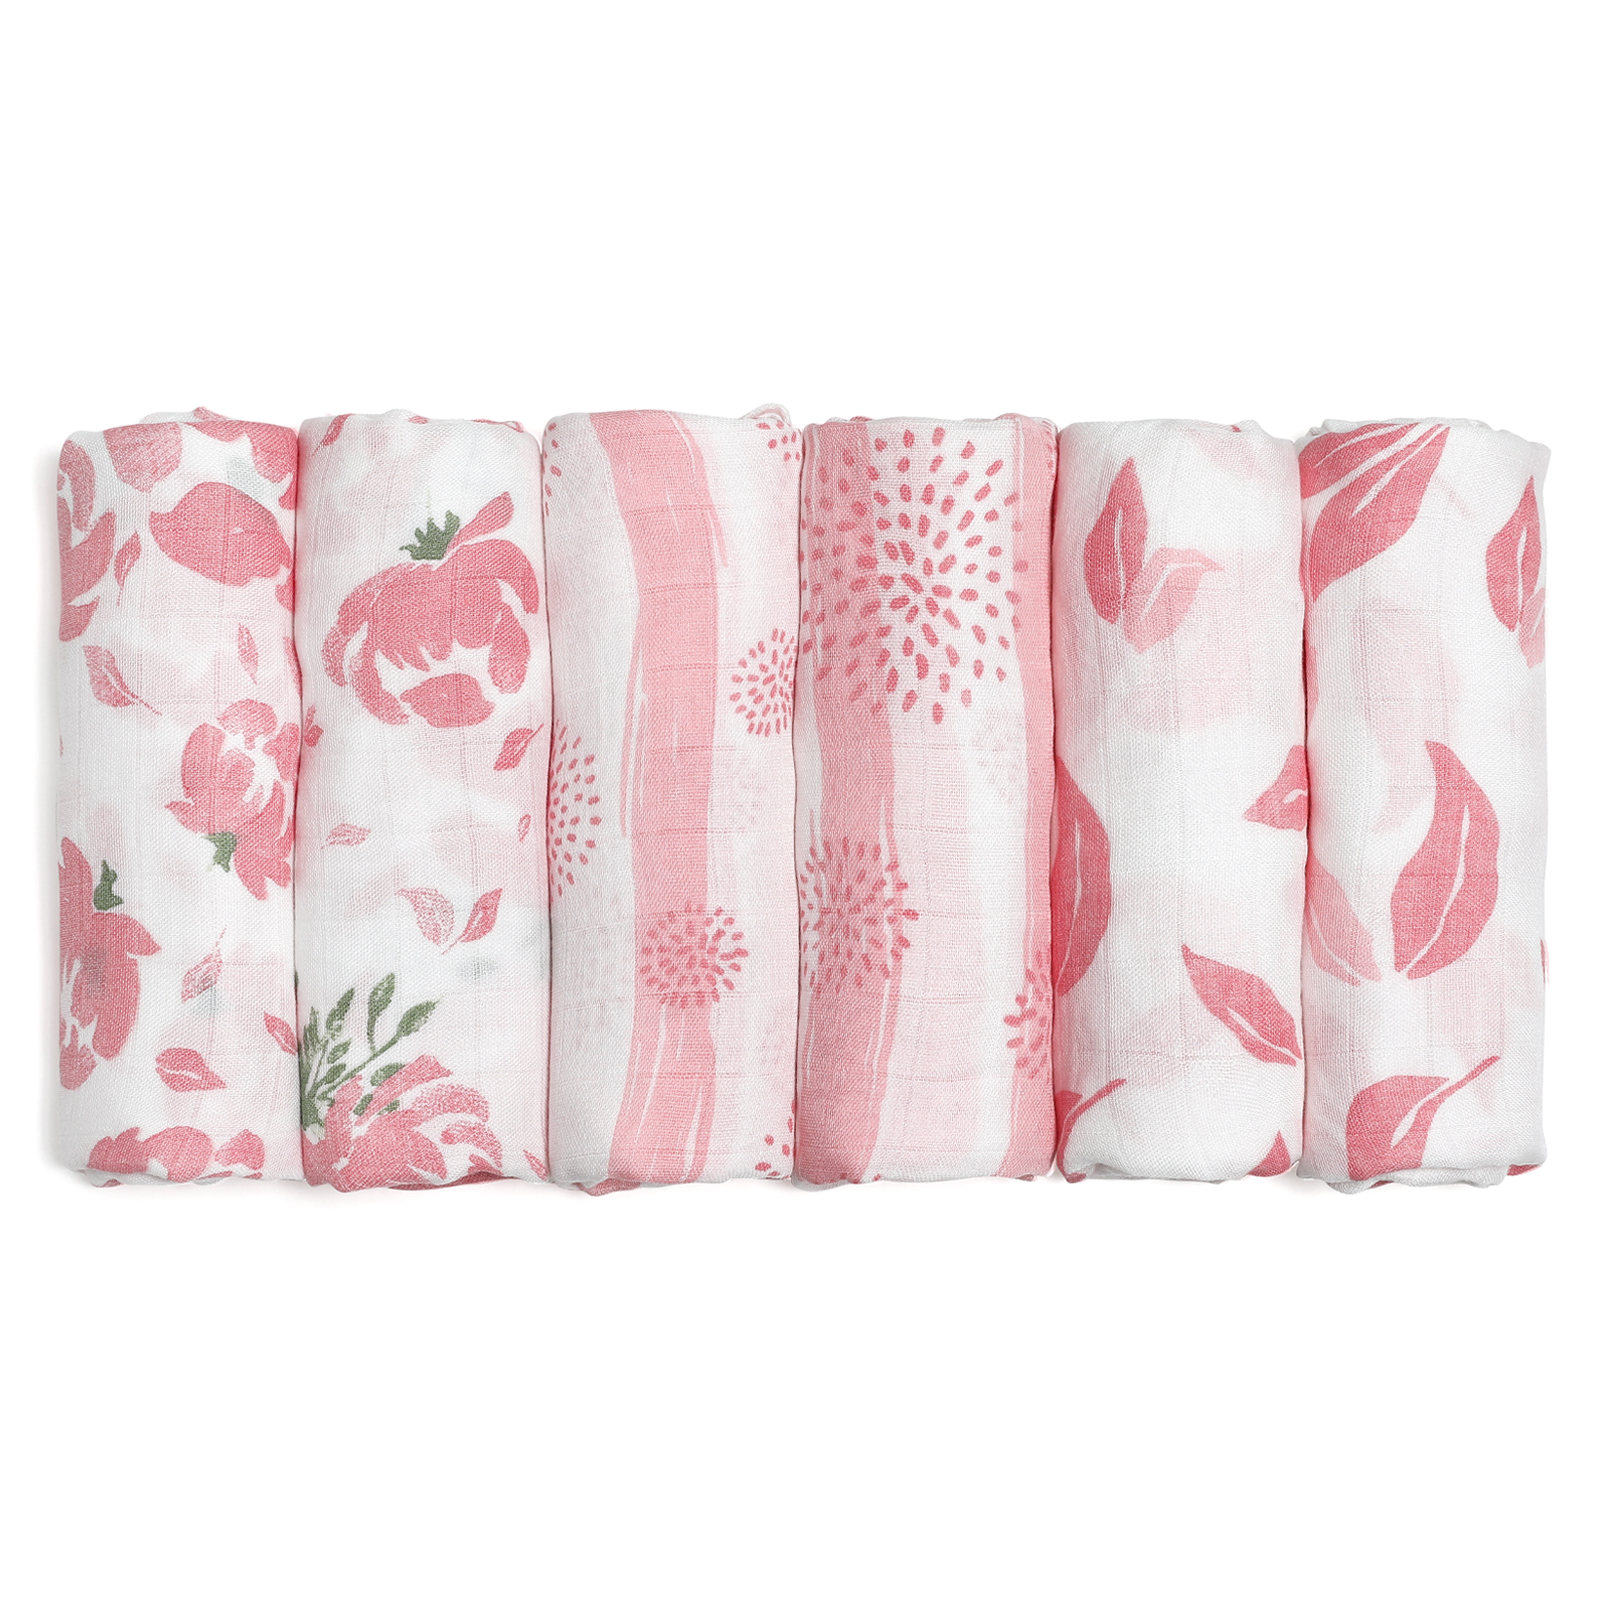 Muslin Swaddle Blankets 6-Pack, 28 X 28" - Pink Floral